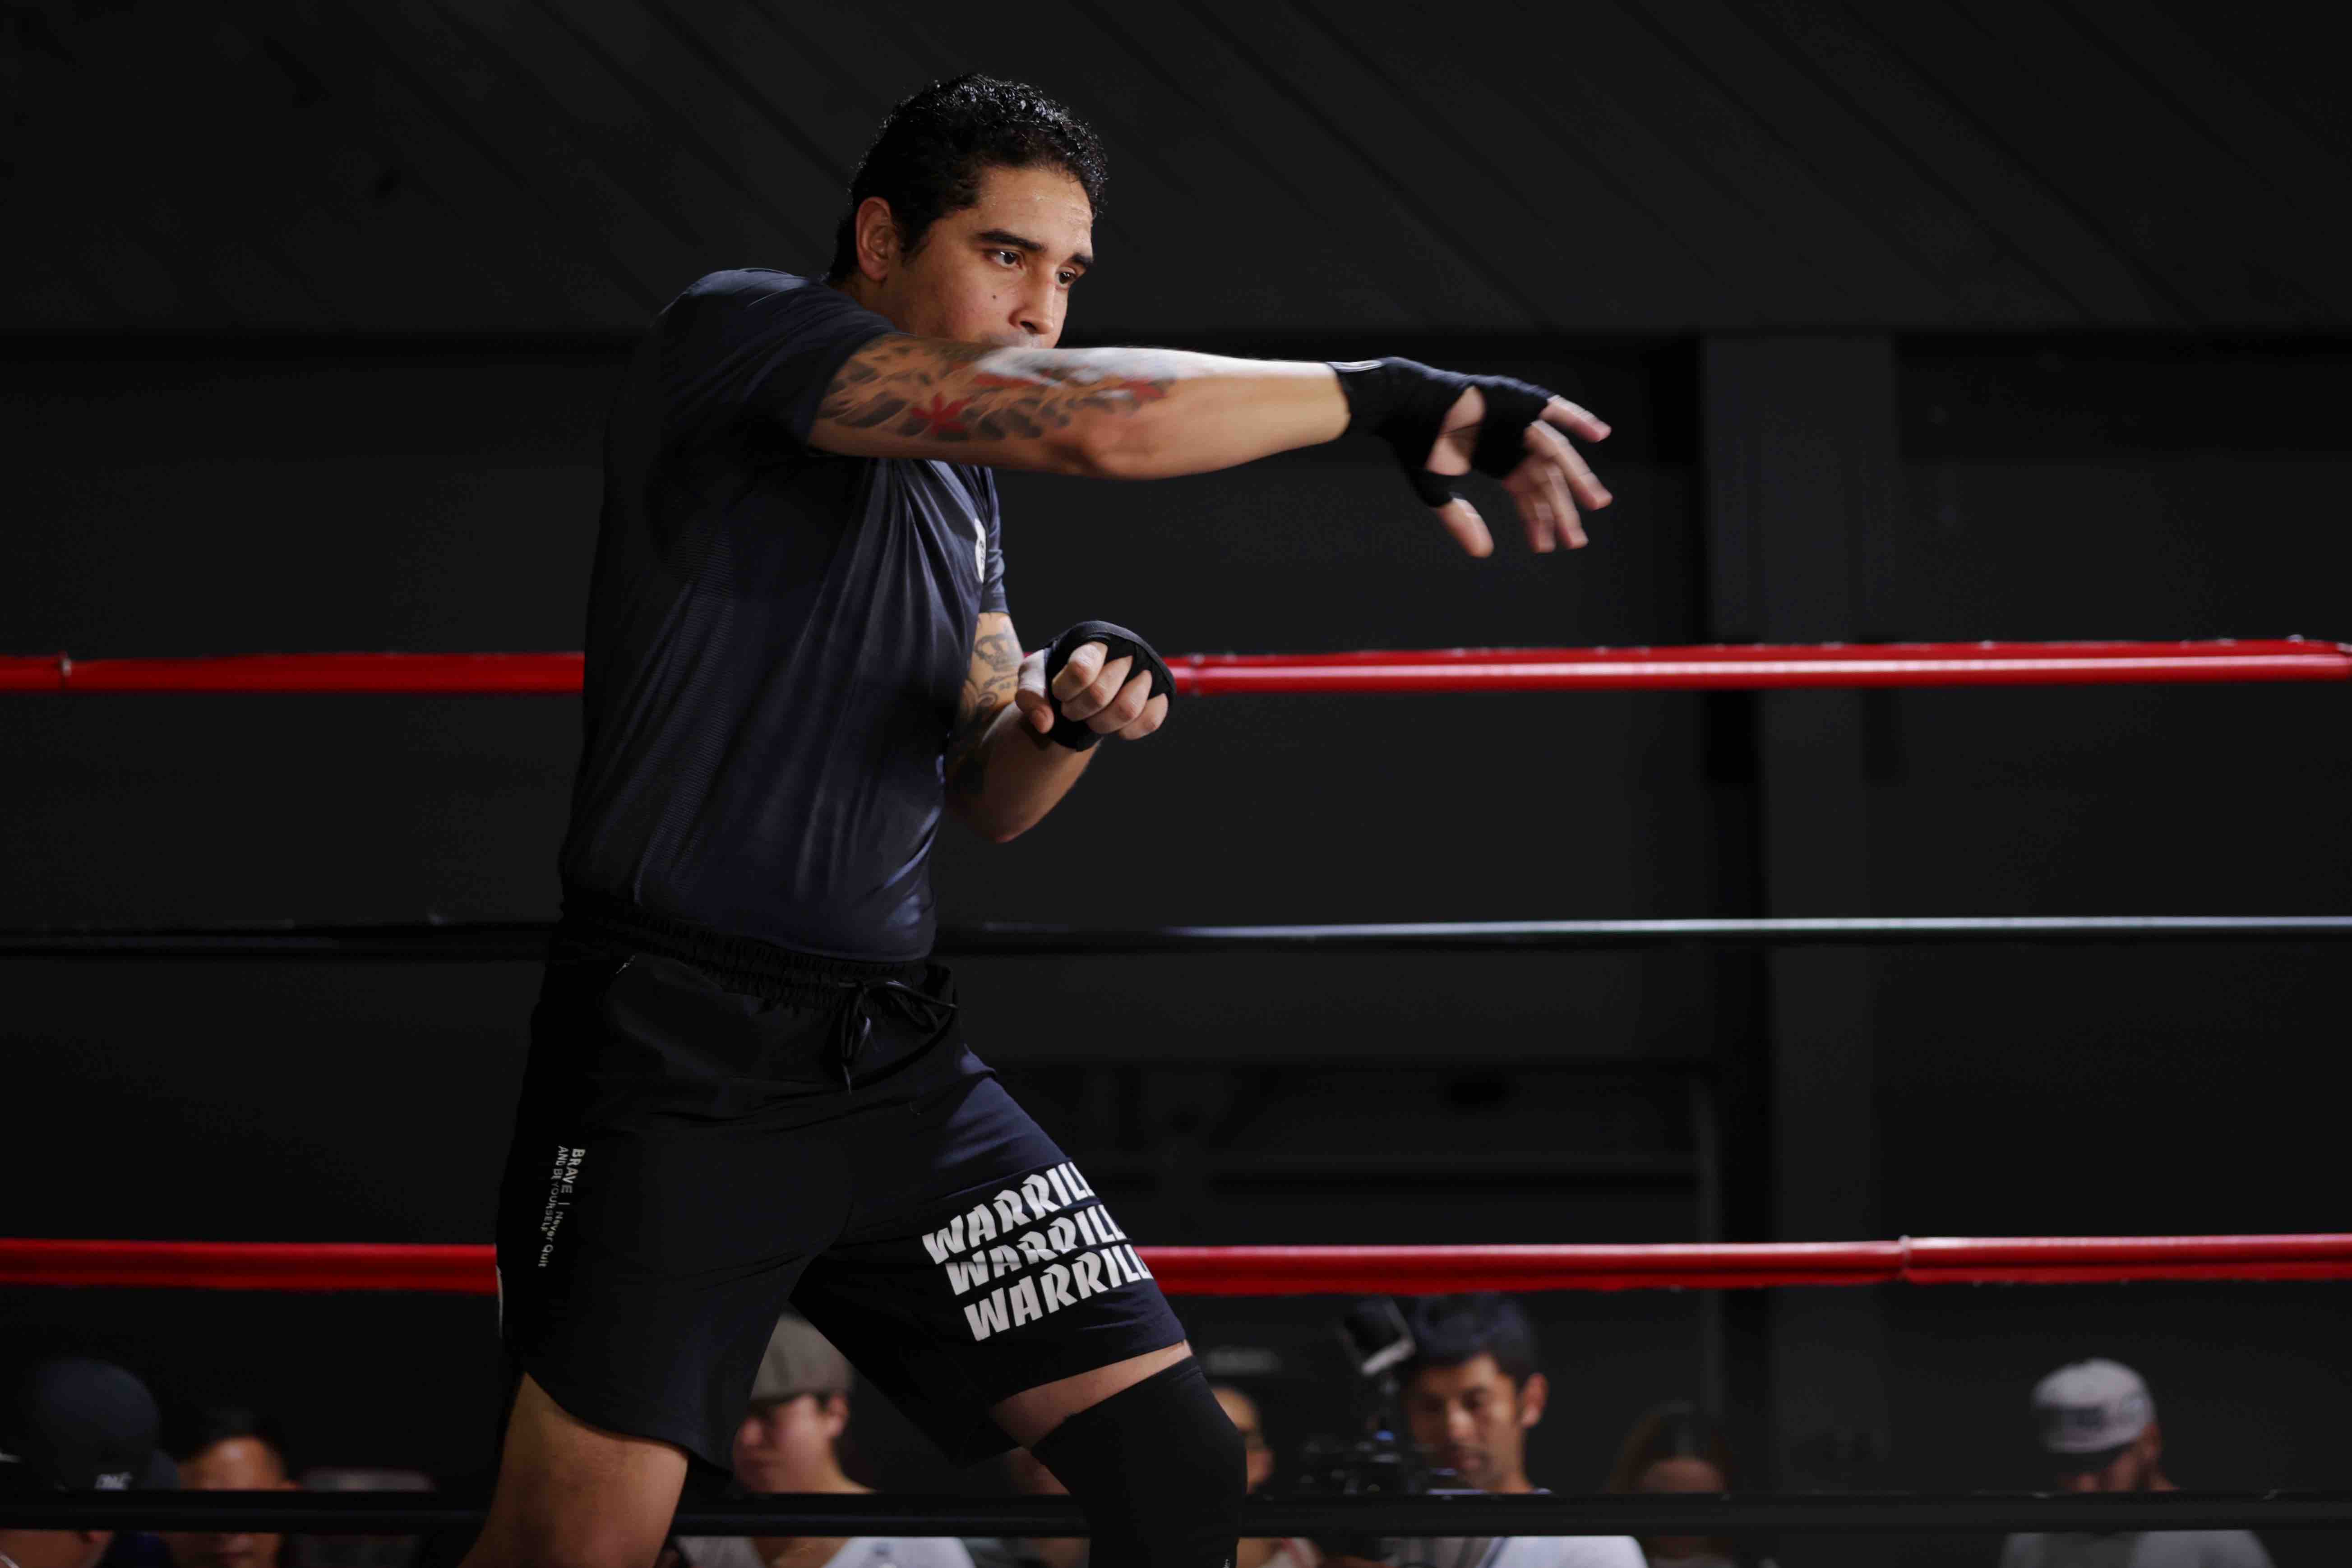 Curiel to be moved fast after September 7th fight